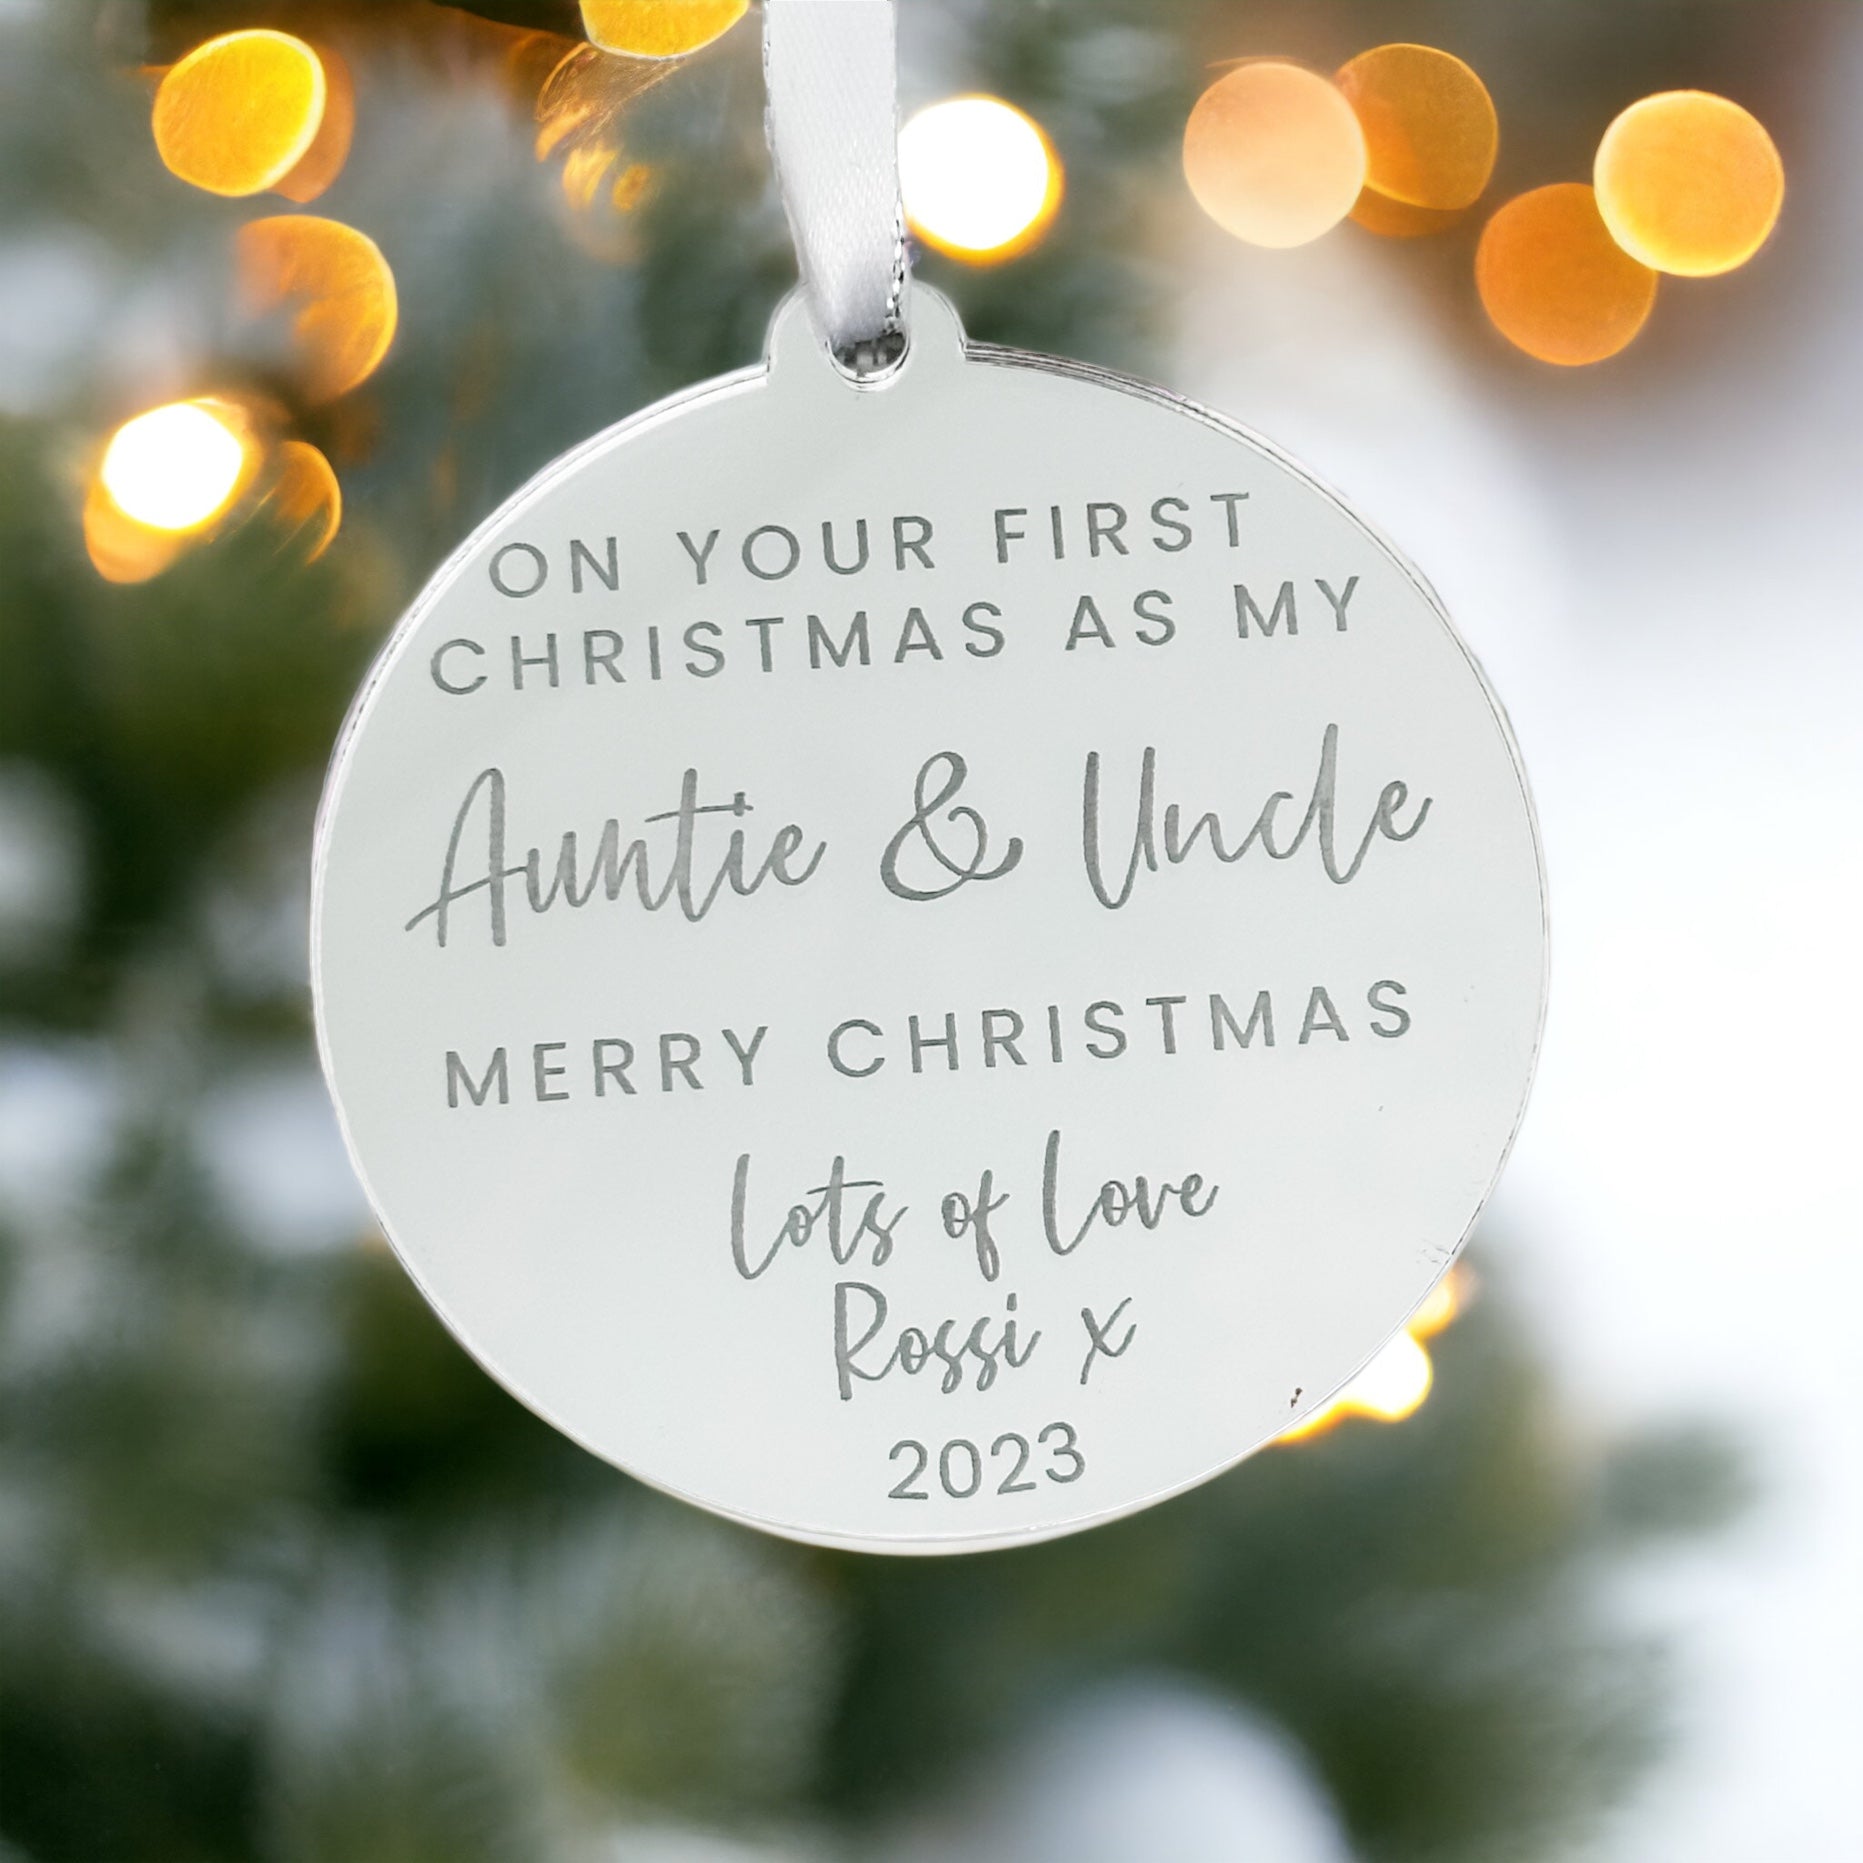 Auntie & Uncle Christmas Gift